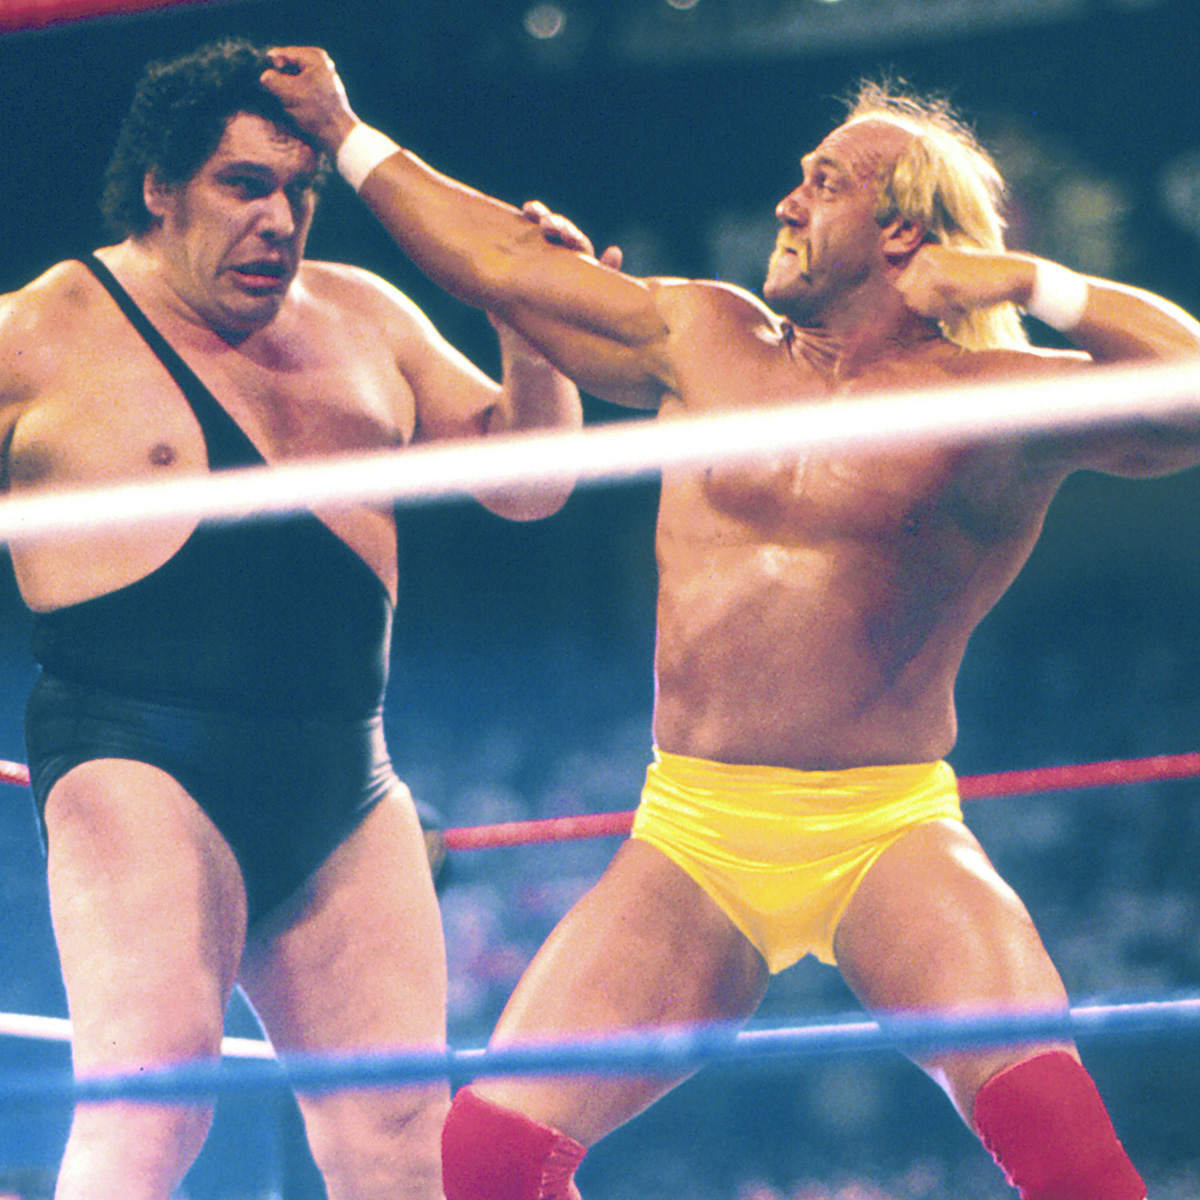 andre the giant and hulk hogan